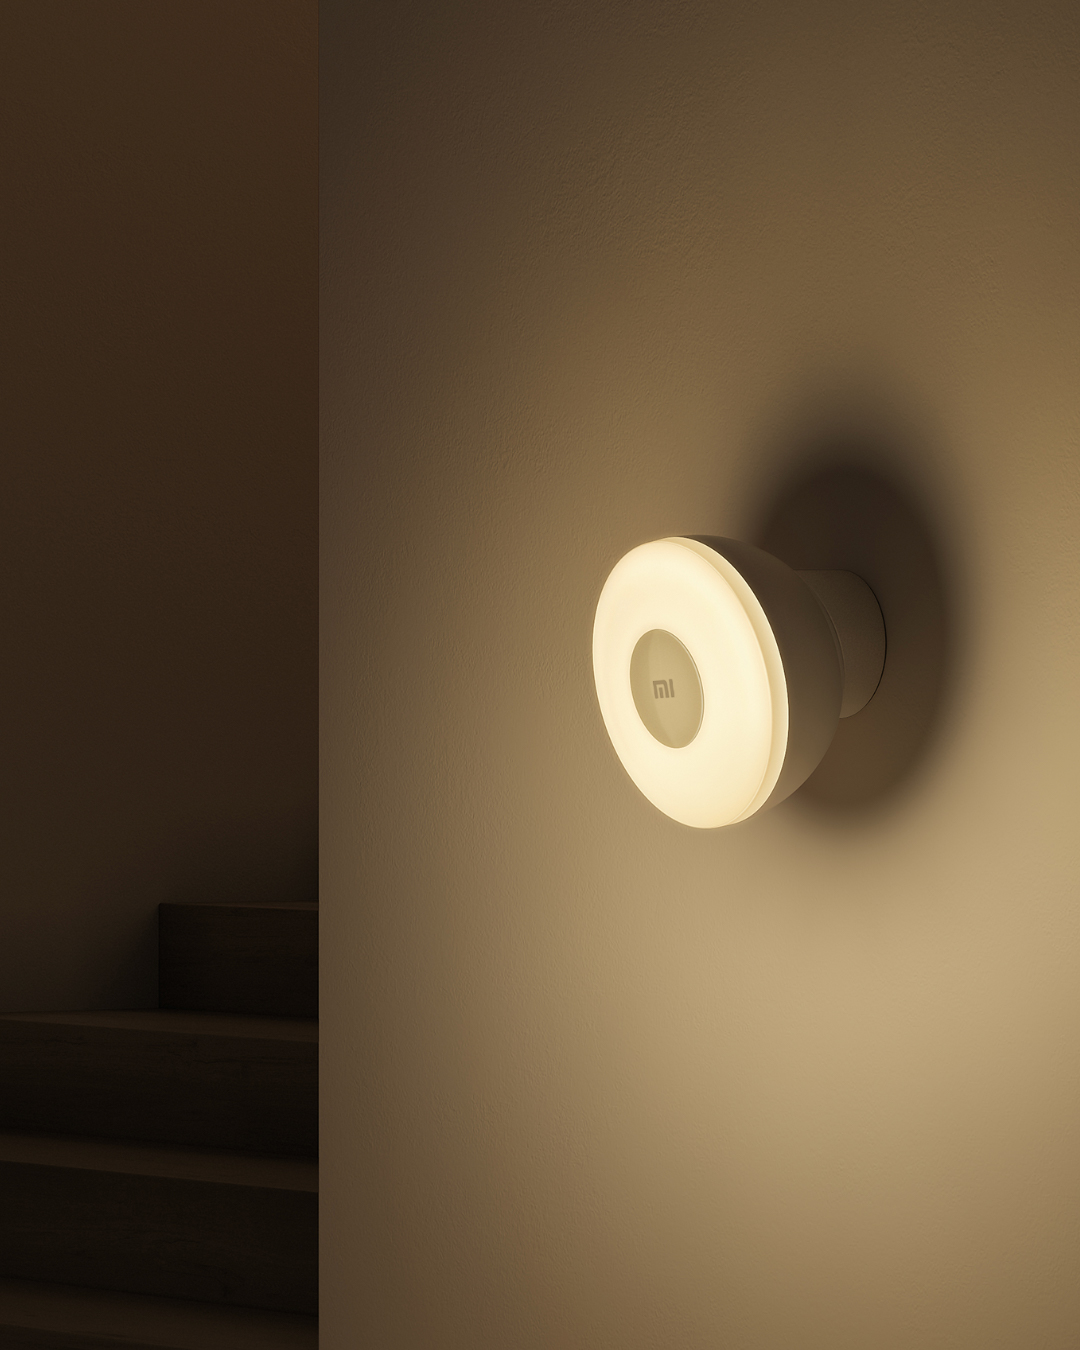 Mi Motion Activated Night Light 2 - Bluetooth - Xiaomi Global Official